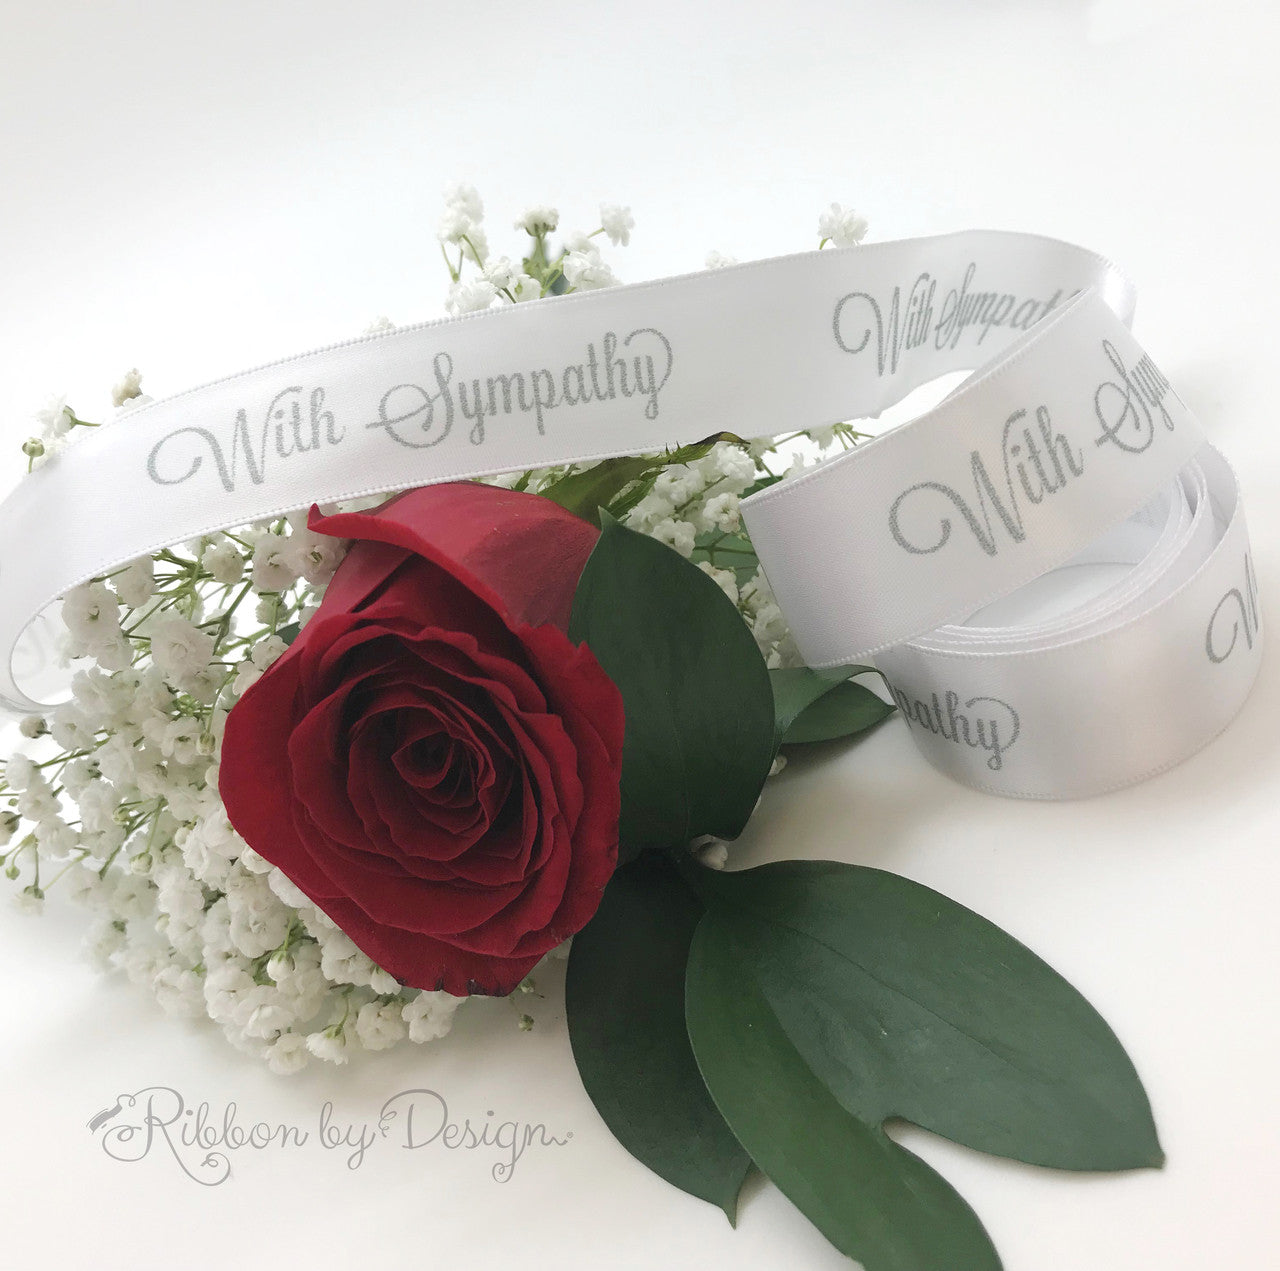 Adding our simple message to a single bloom or a sympathy arrangement makes the perfect statement.